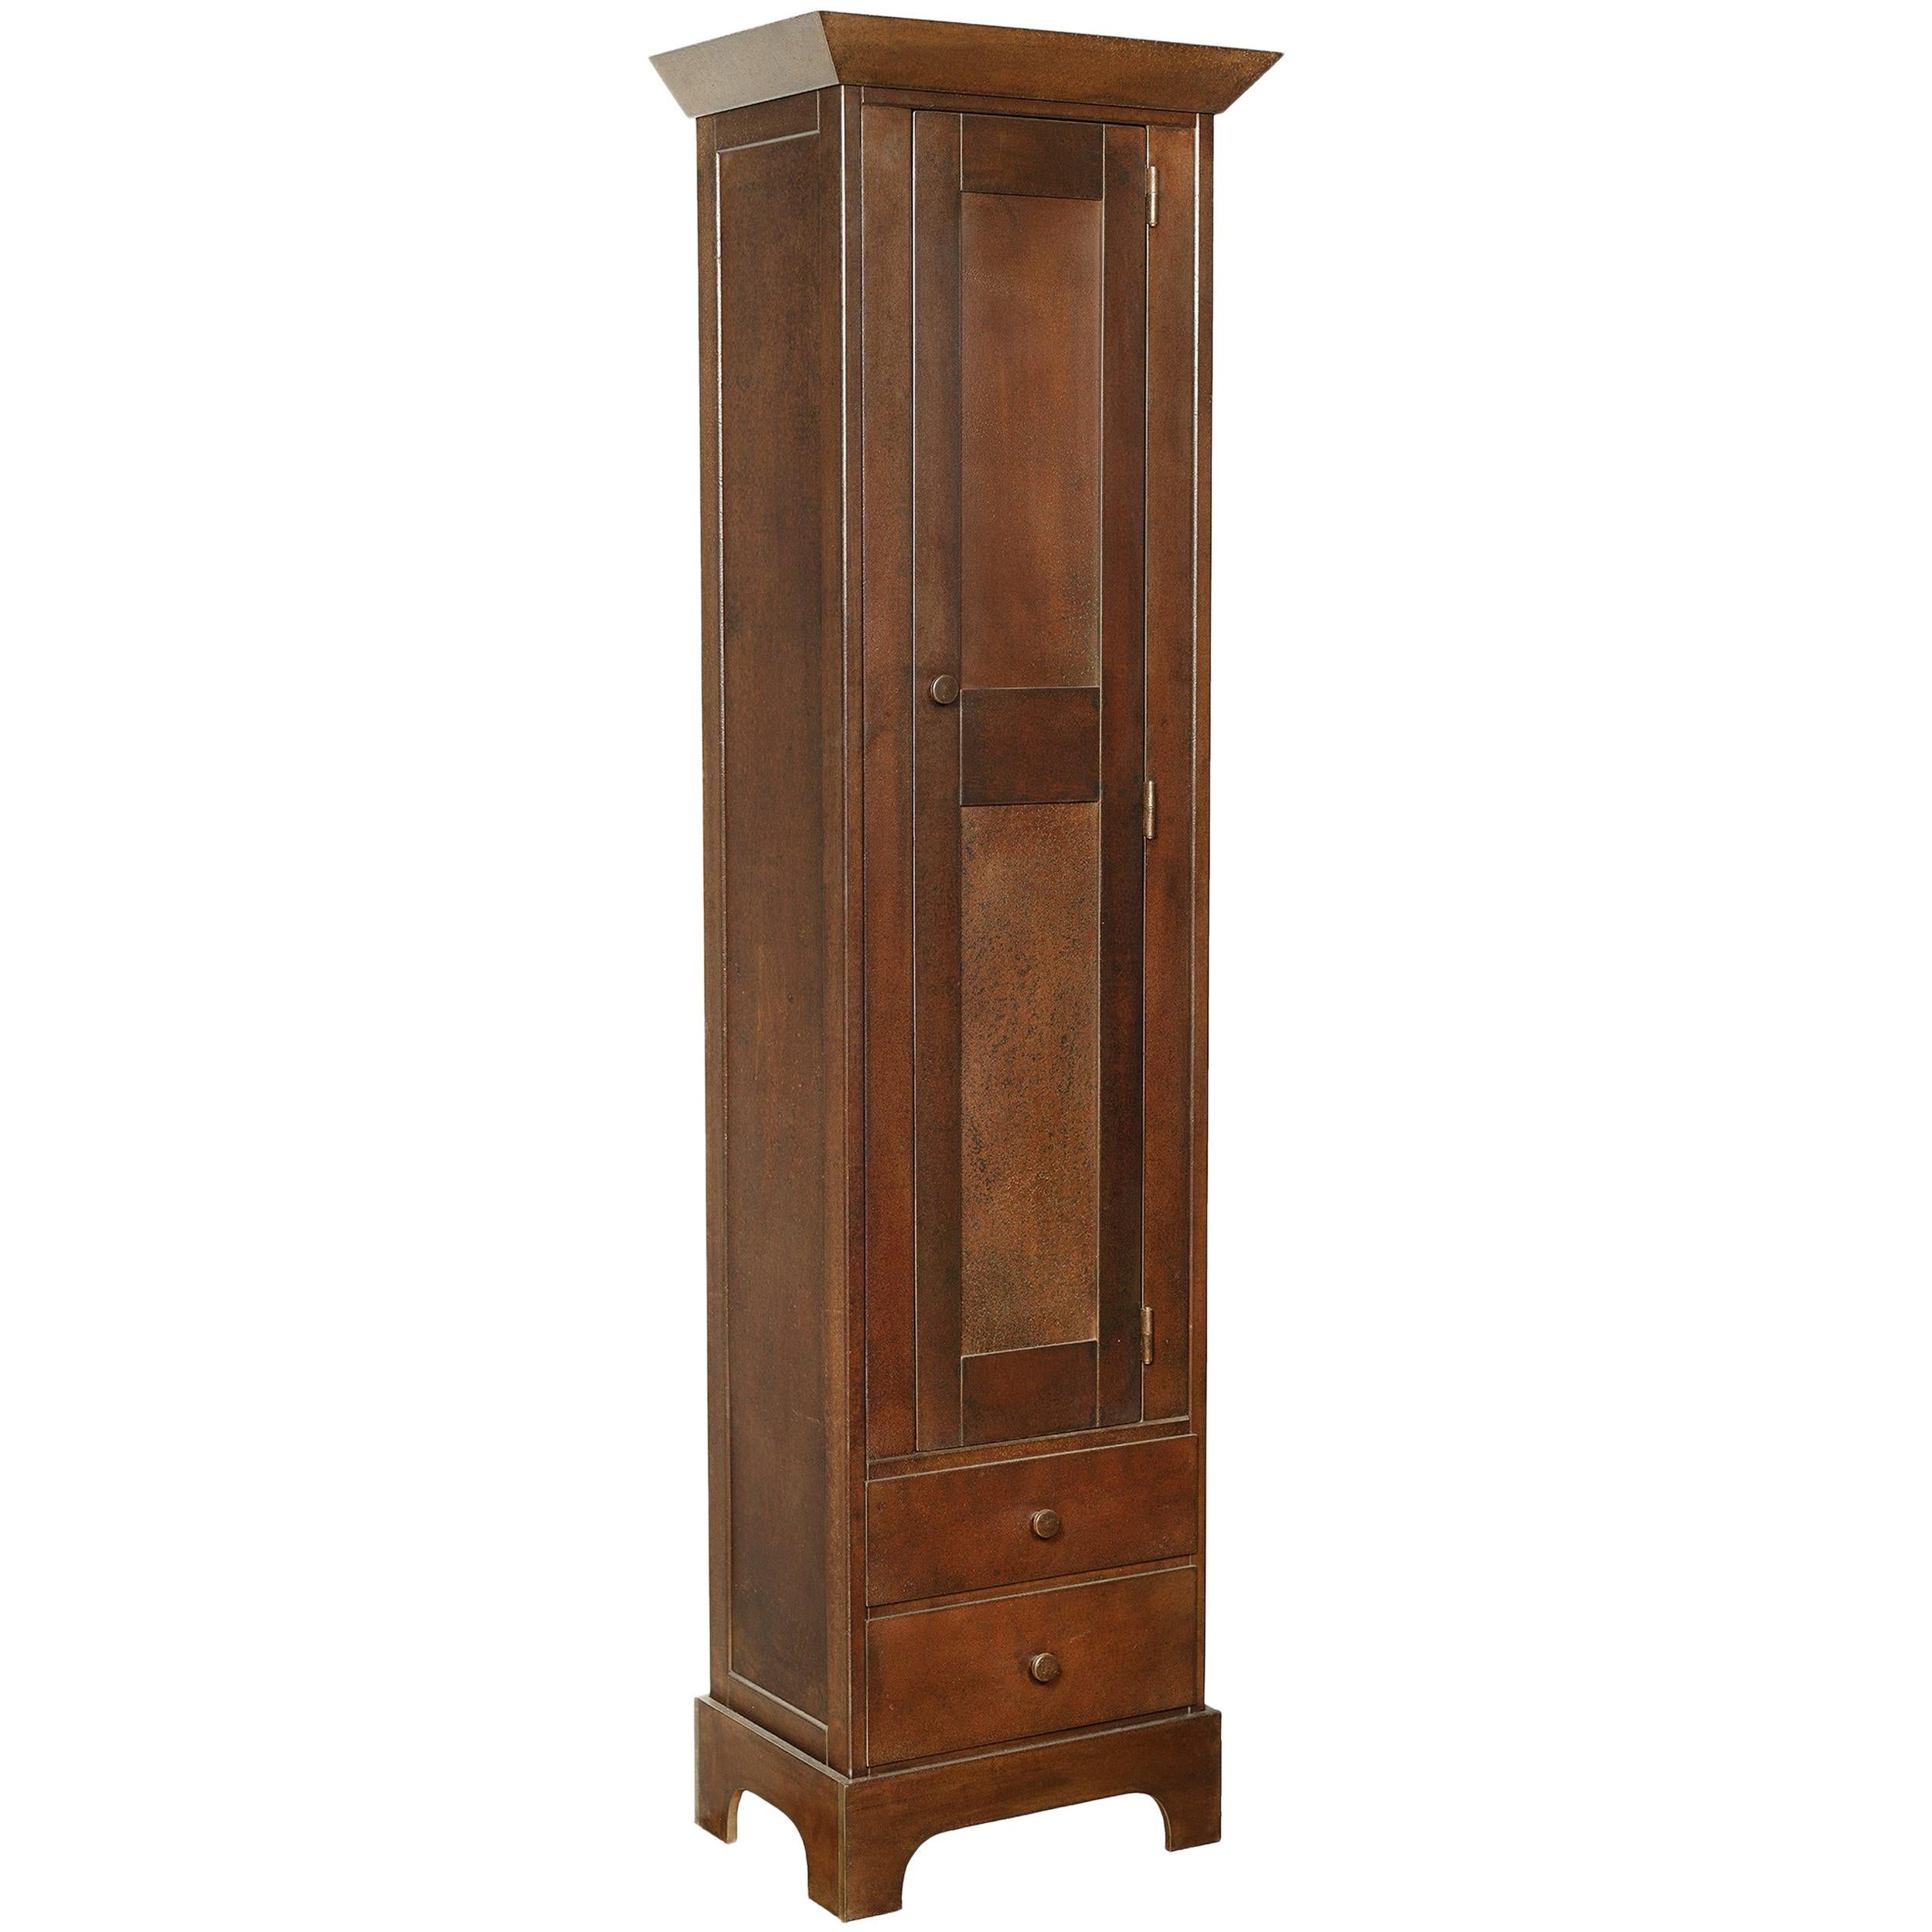 Jim Rose Legacy Collection - Tall Cabinet, Shaker Inspired Steel Cupboard